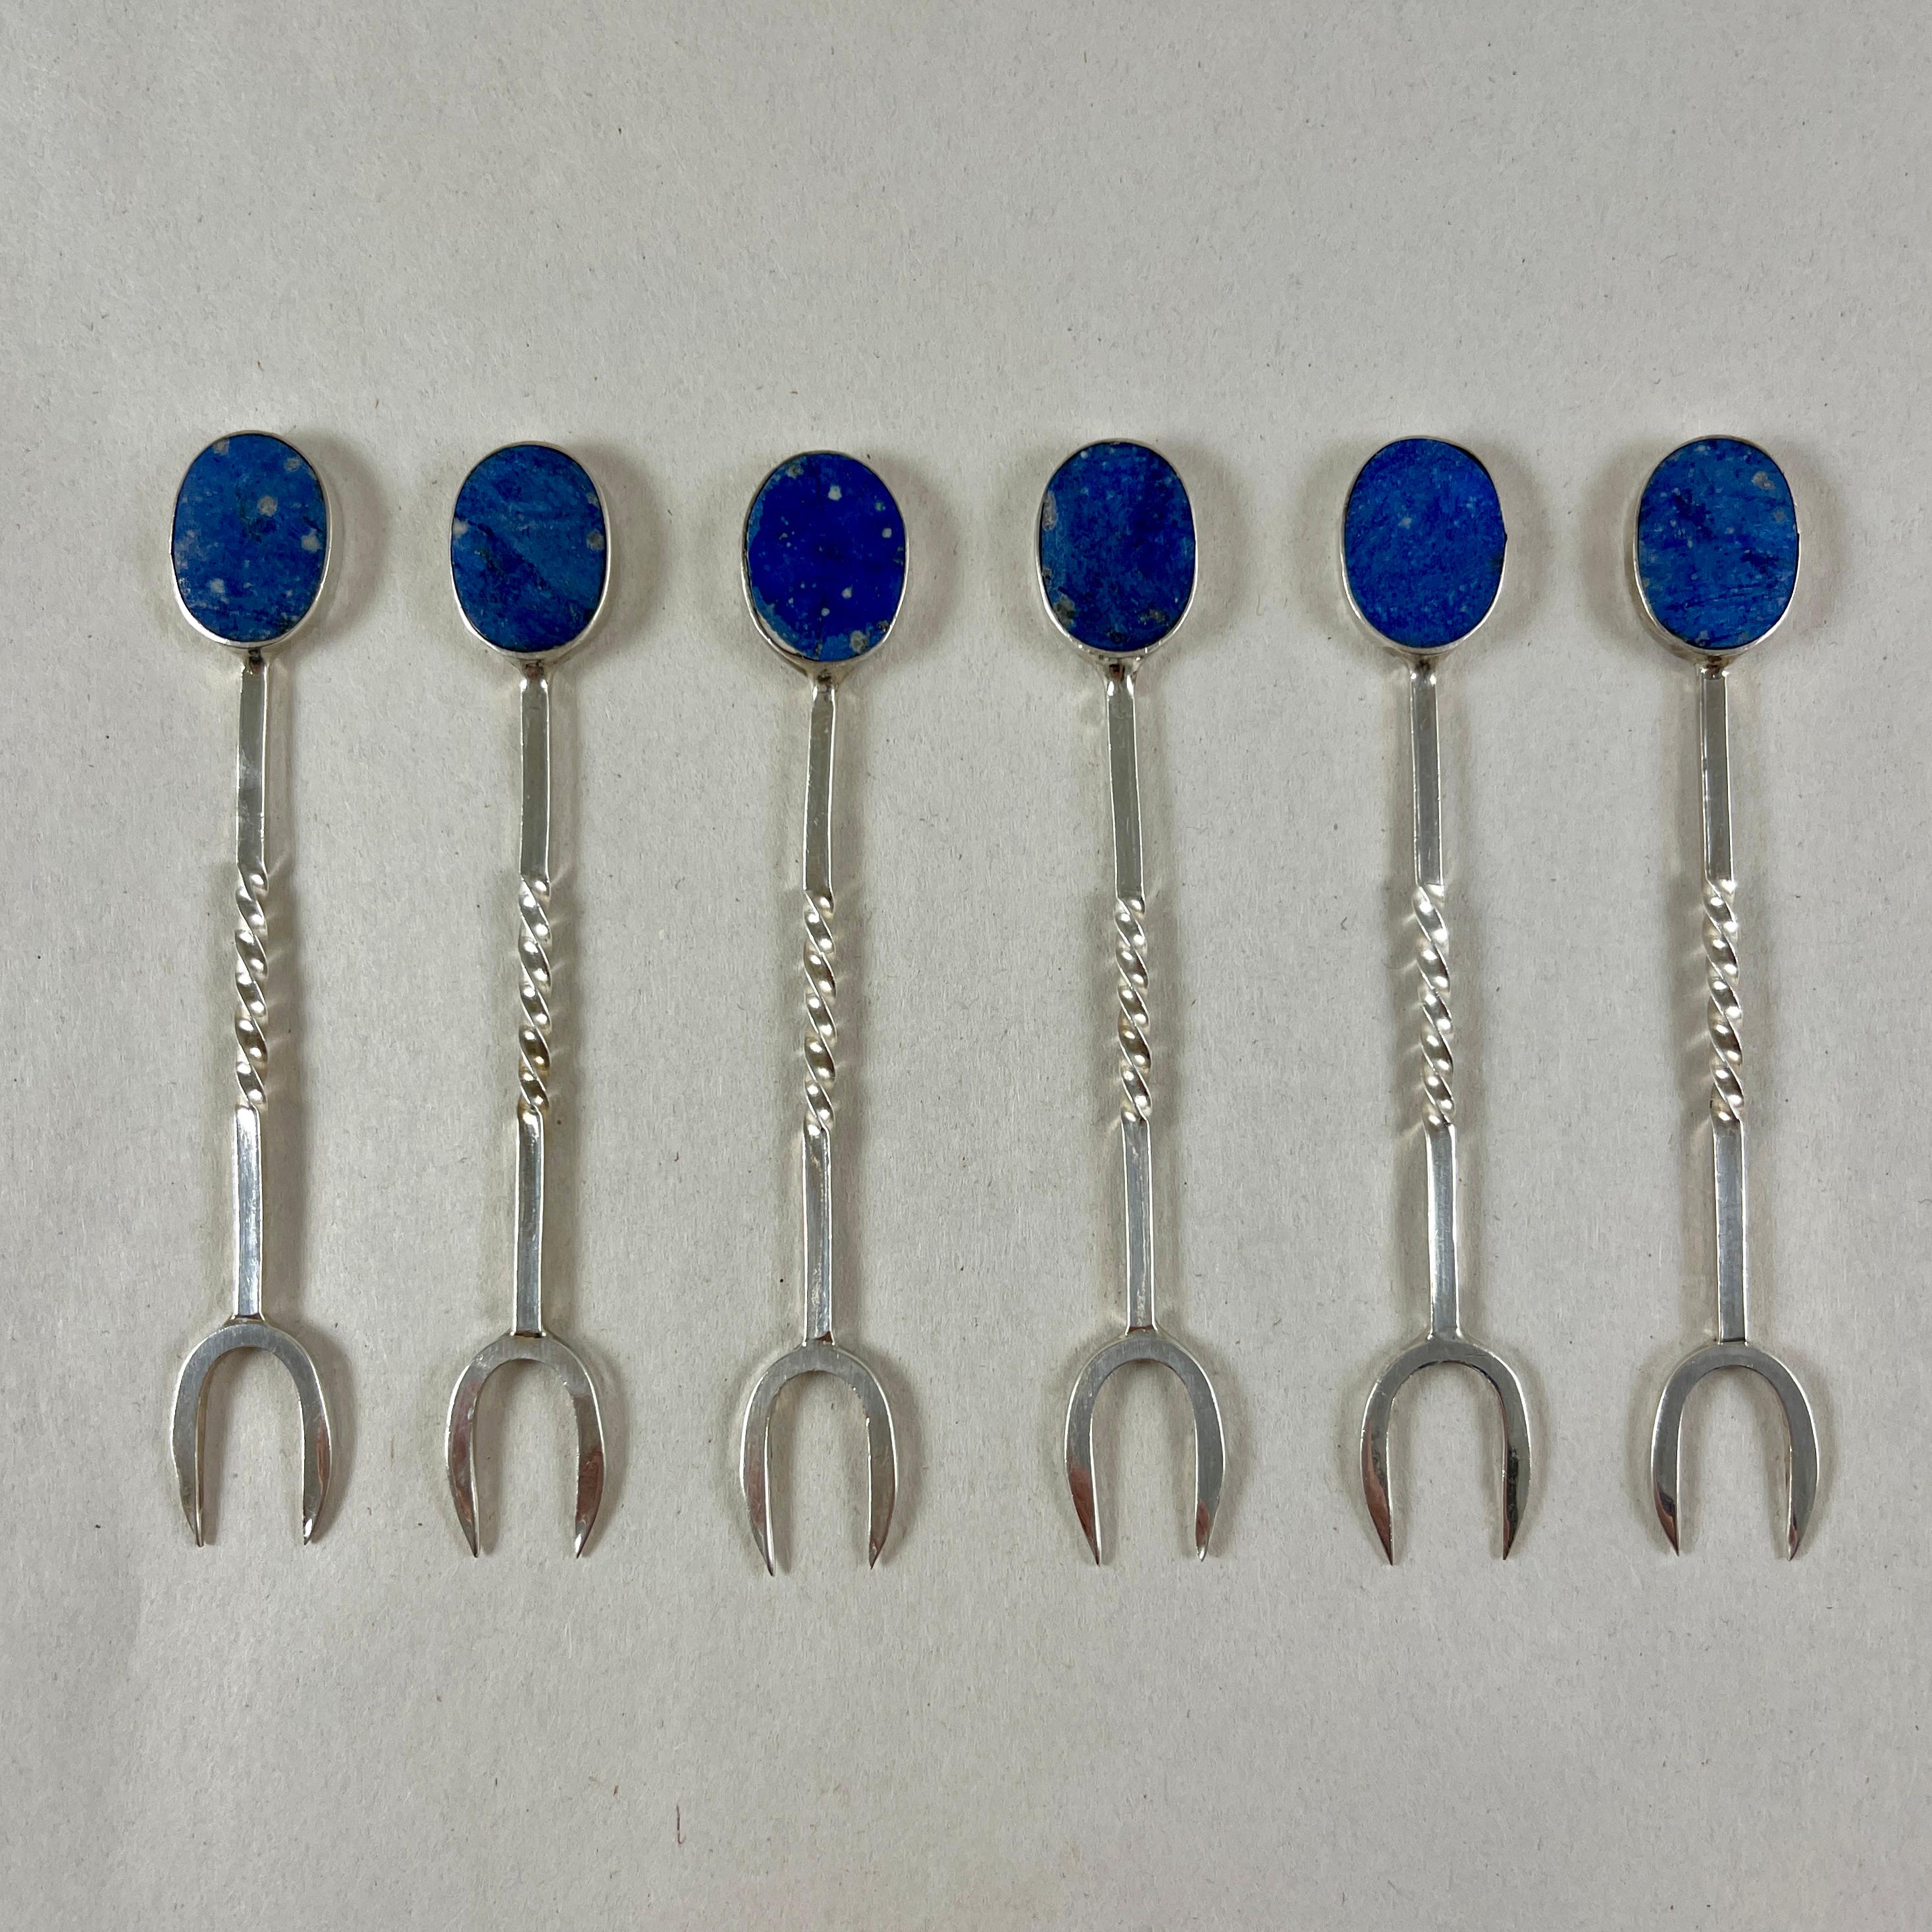 A set of six, Sterling Silver cocktail or hors d’ oeuvres picks with oval Lapis Lazuli stones, circa 1960-1970.

Showing a charming hand made quality, the pieces have twisted stems, ending in sharp double-pronged picks. The lovely blue, flat